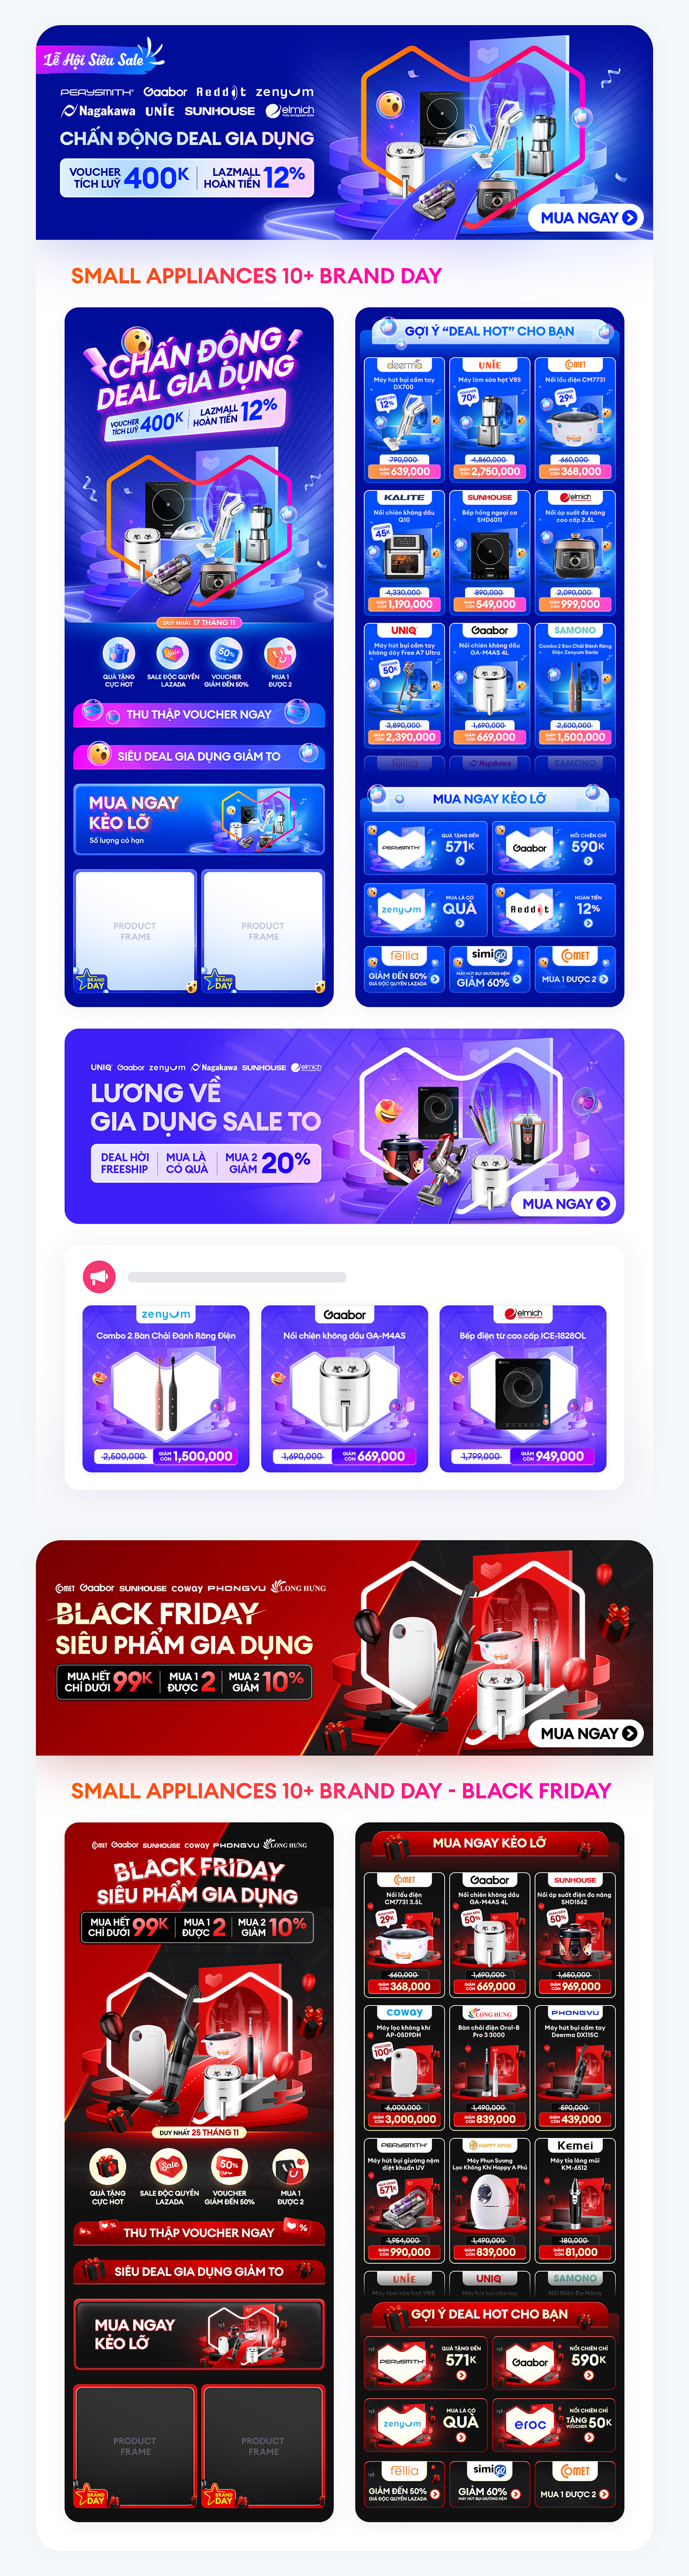 lazada campaign banner commercial electronic Keyvisual Ecommerce season thematic kv